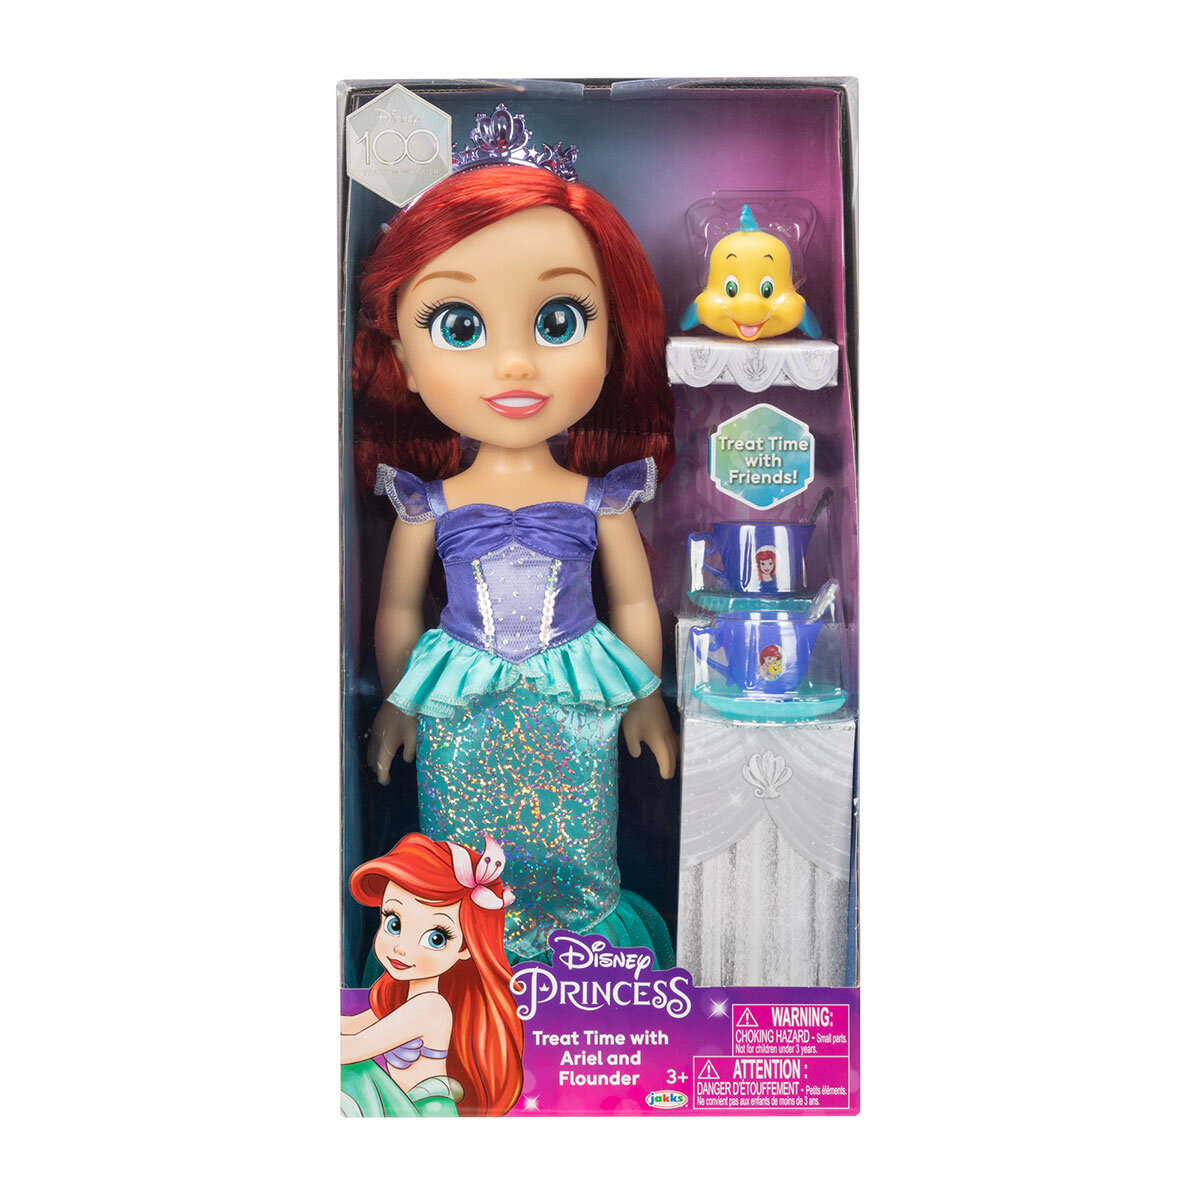 Buy Disney Tea Time Party Doll Ariel & Flounder Lifestyle Image at Costco.co.uk